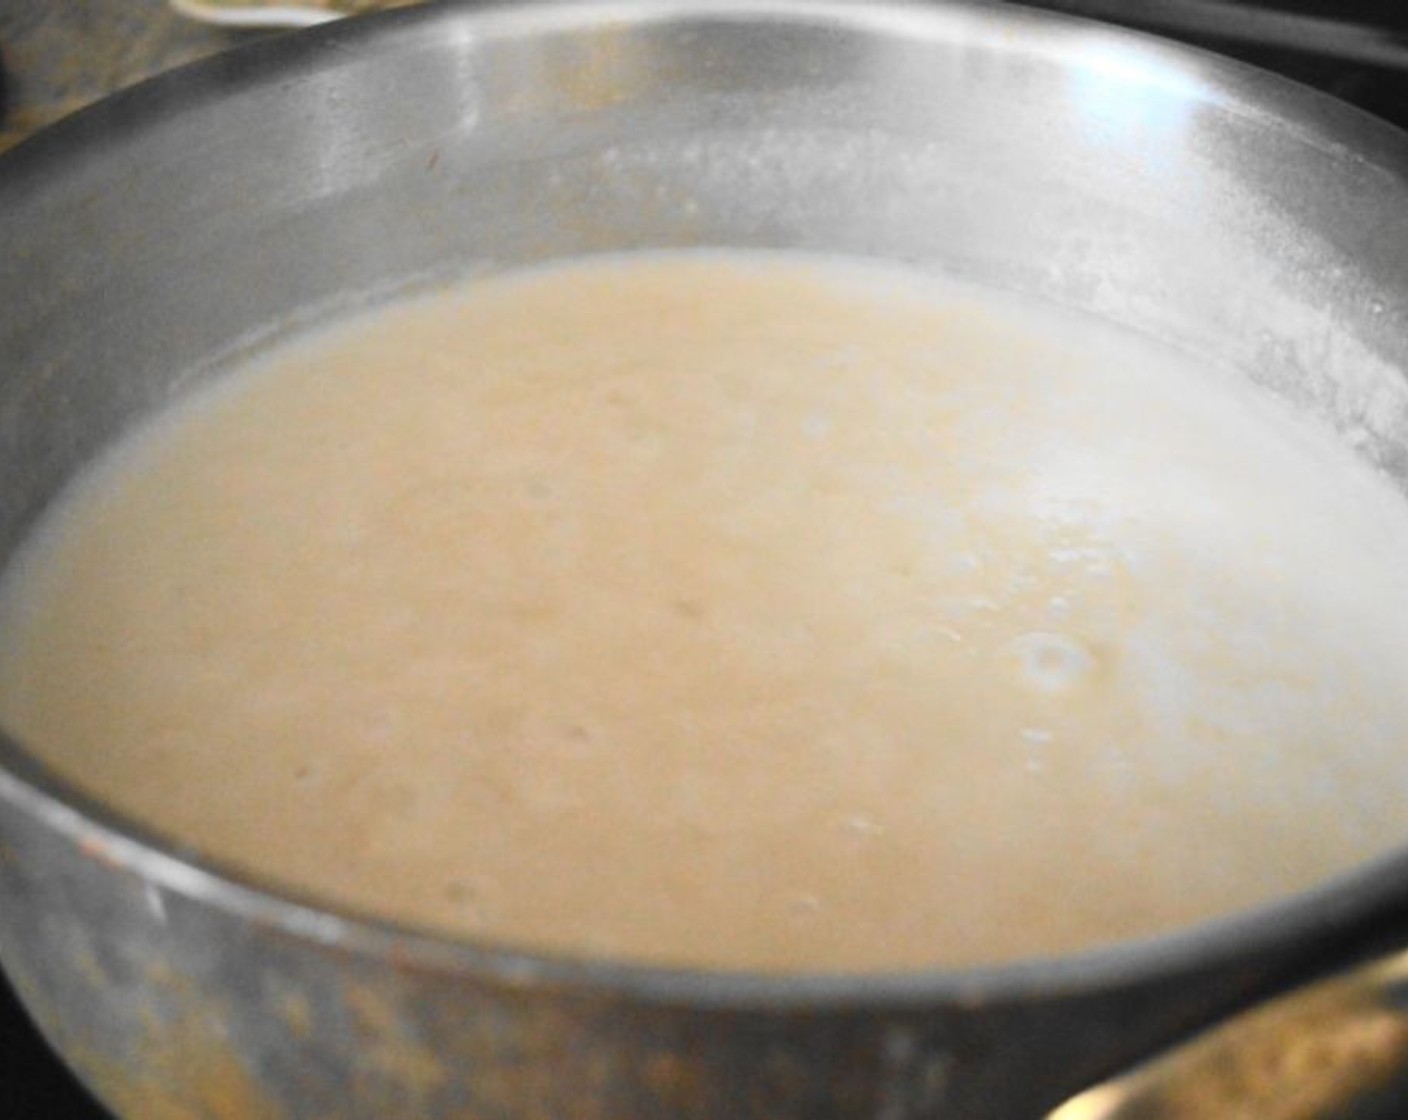 step 8 Once the bechamel sauce has cooked for 15 minutes, whisk in Sharp Cheddar Cheese (1 cup), Smoked Gruyere Cheese (1/2 cup), and Smoked Gouda (1/2 cup) until it becomes a smooth, rich sauce. Stir in the sliced bratwurst as well and let the mixture bubble together for a minute.